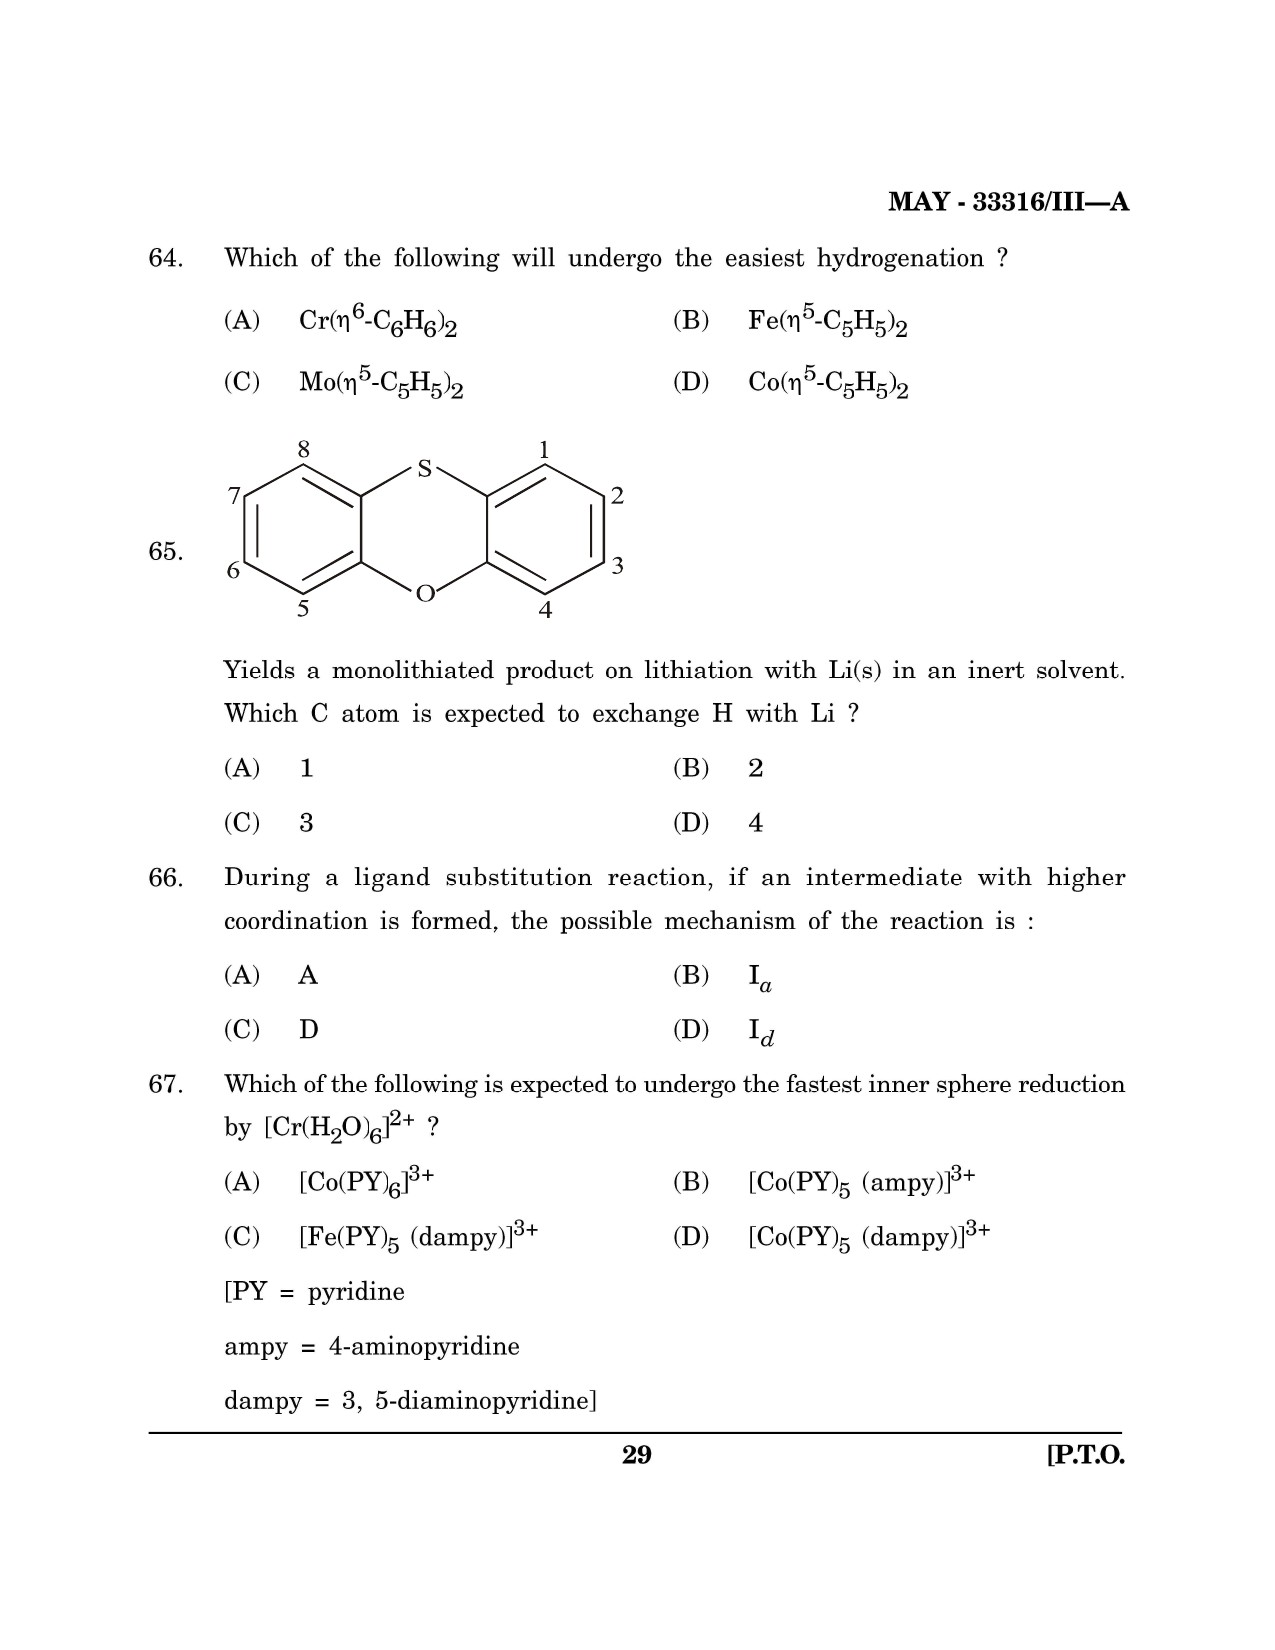 Maharashtra SET Chemical Sciences Question Paper III May 2016 28